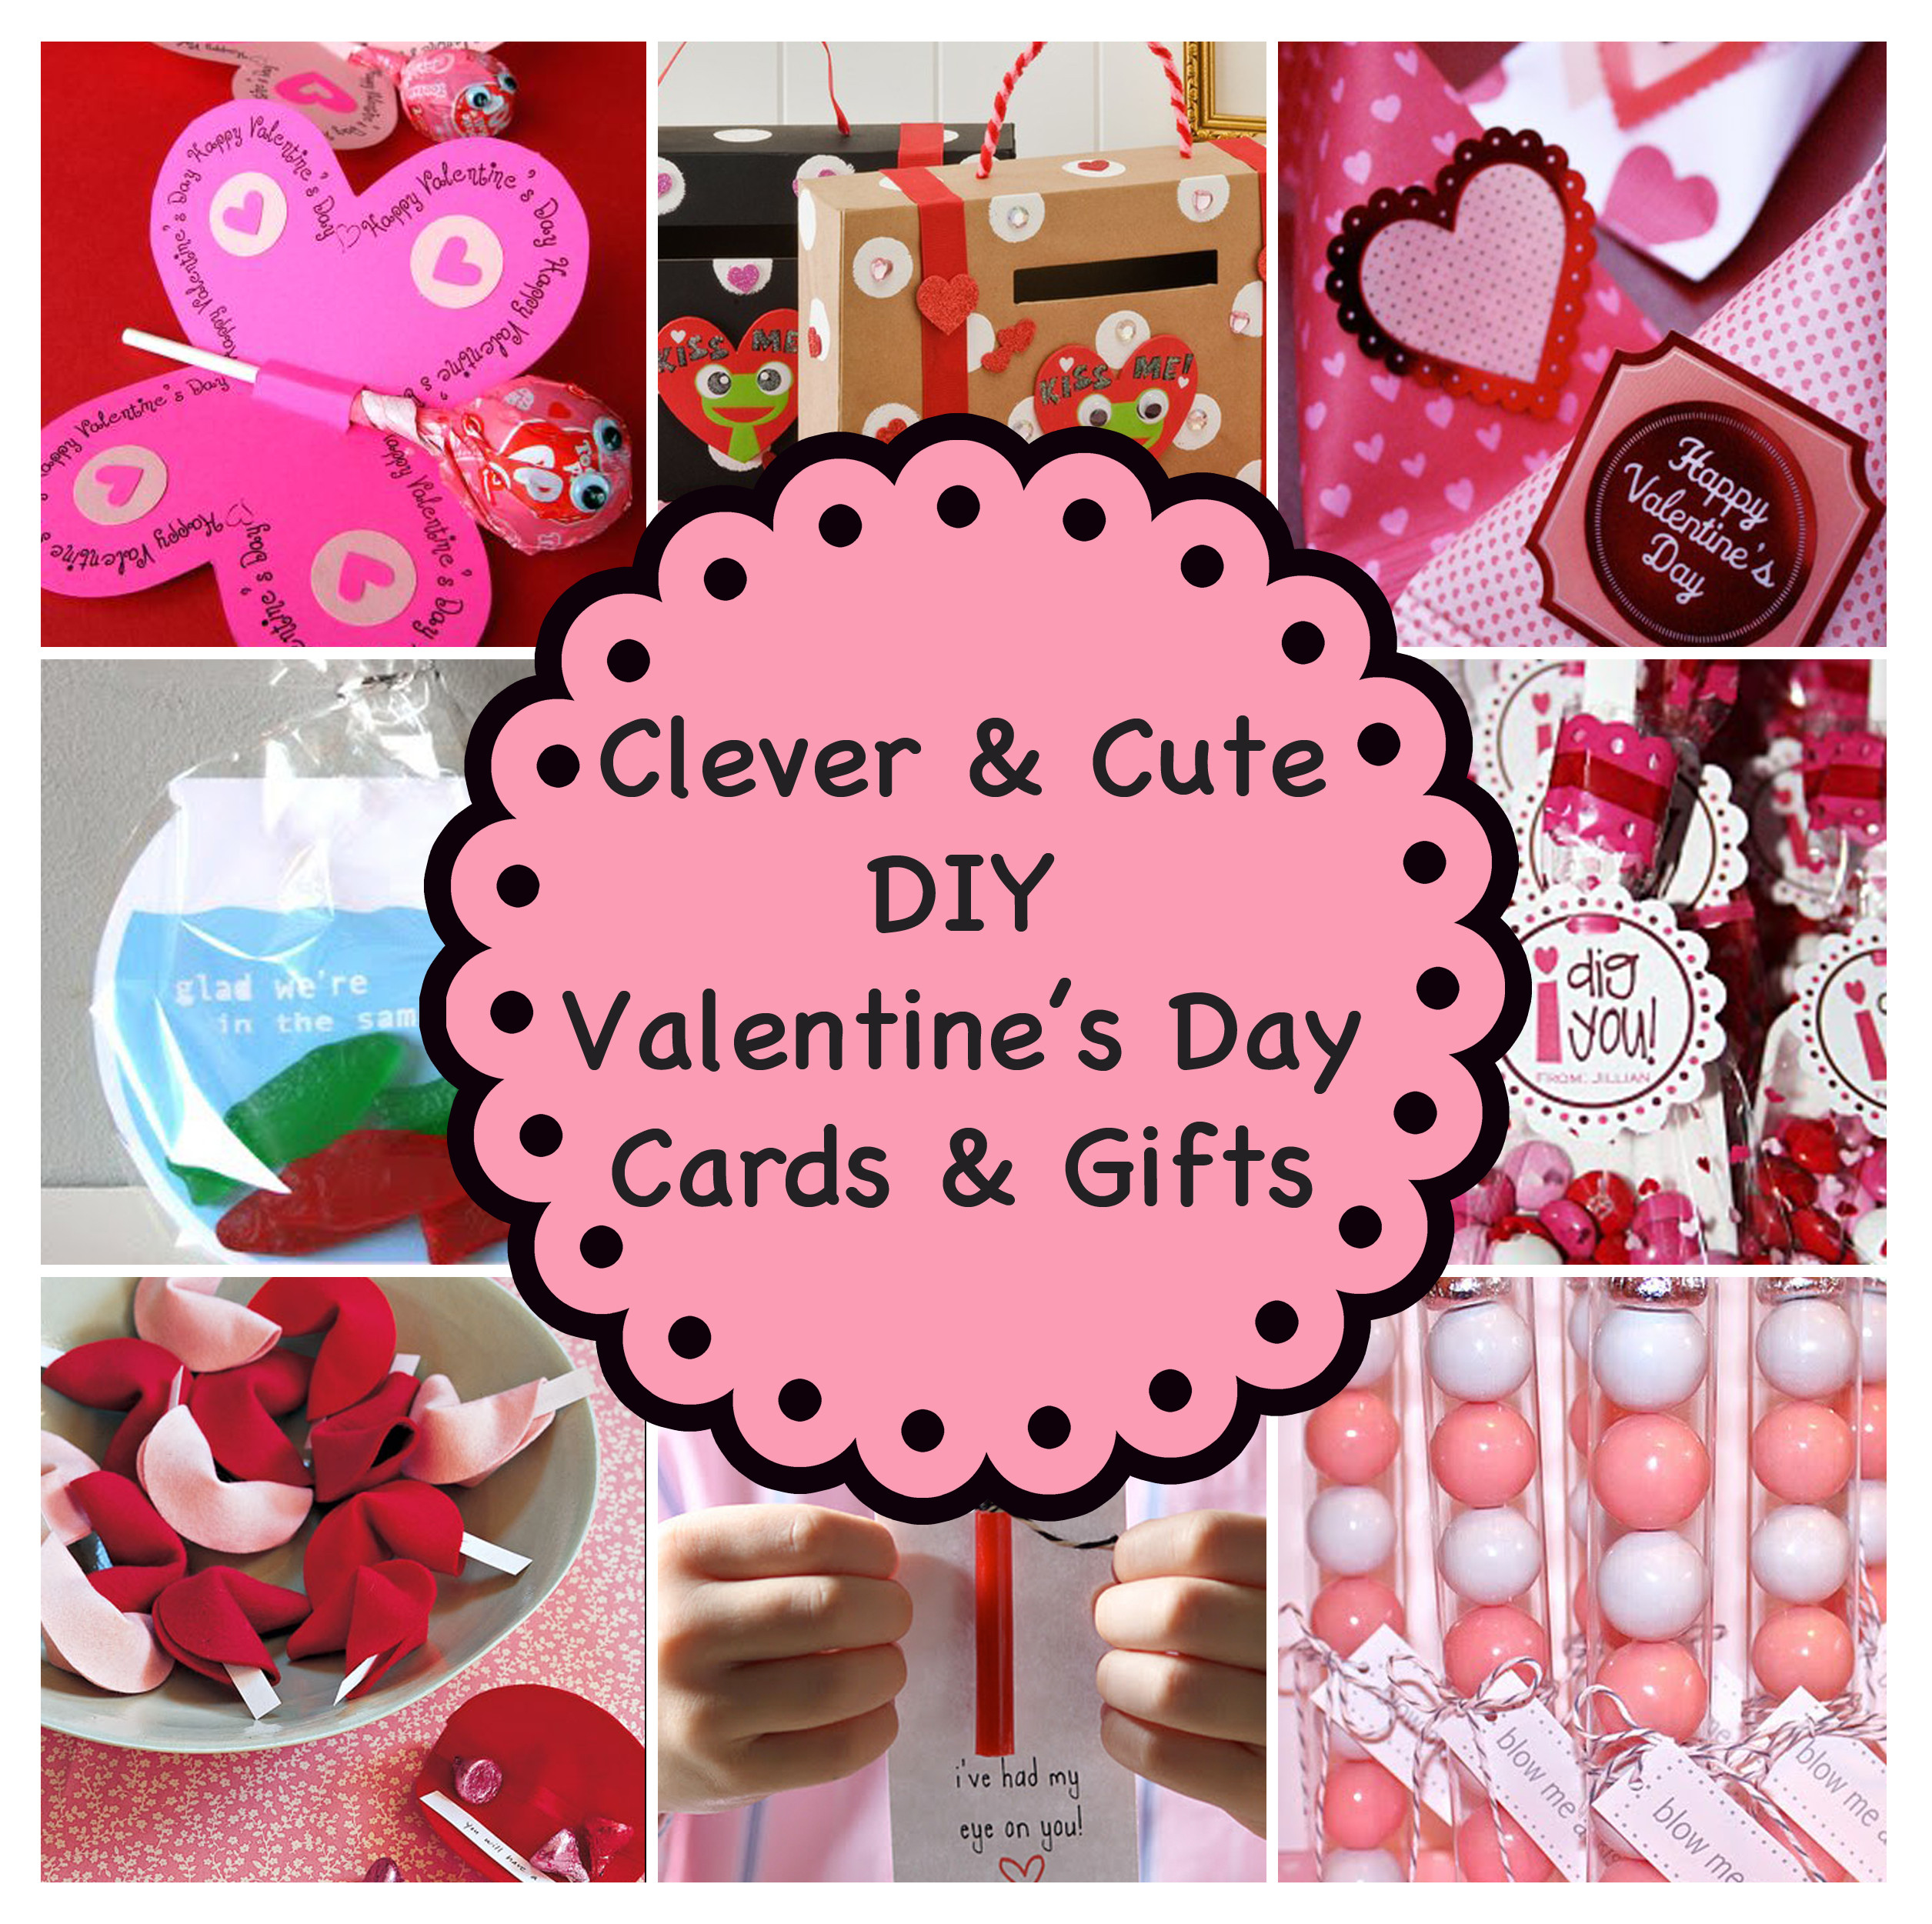 Valentines Day Cards Ideas
 Clever and Cute DIY Valentine’s Day Cards & Gifts